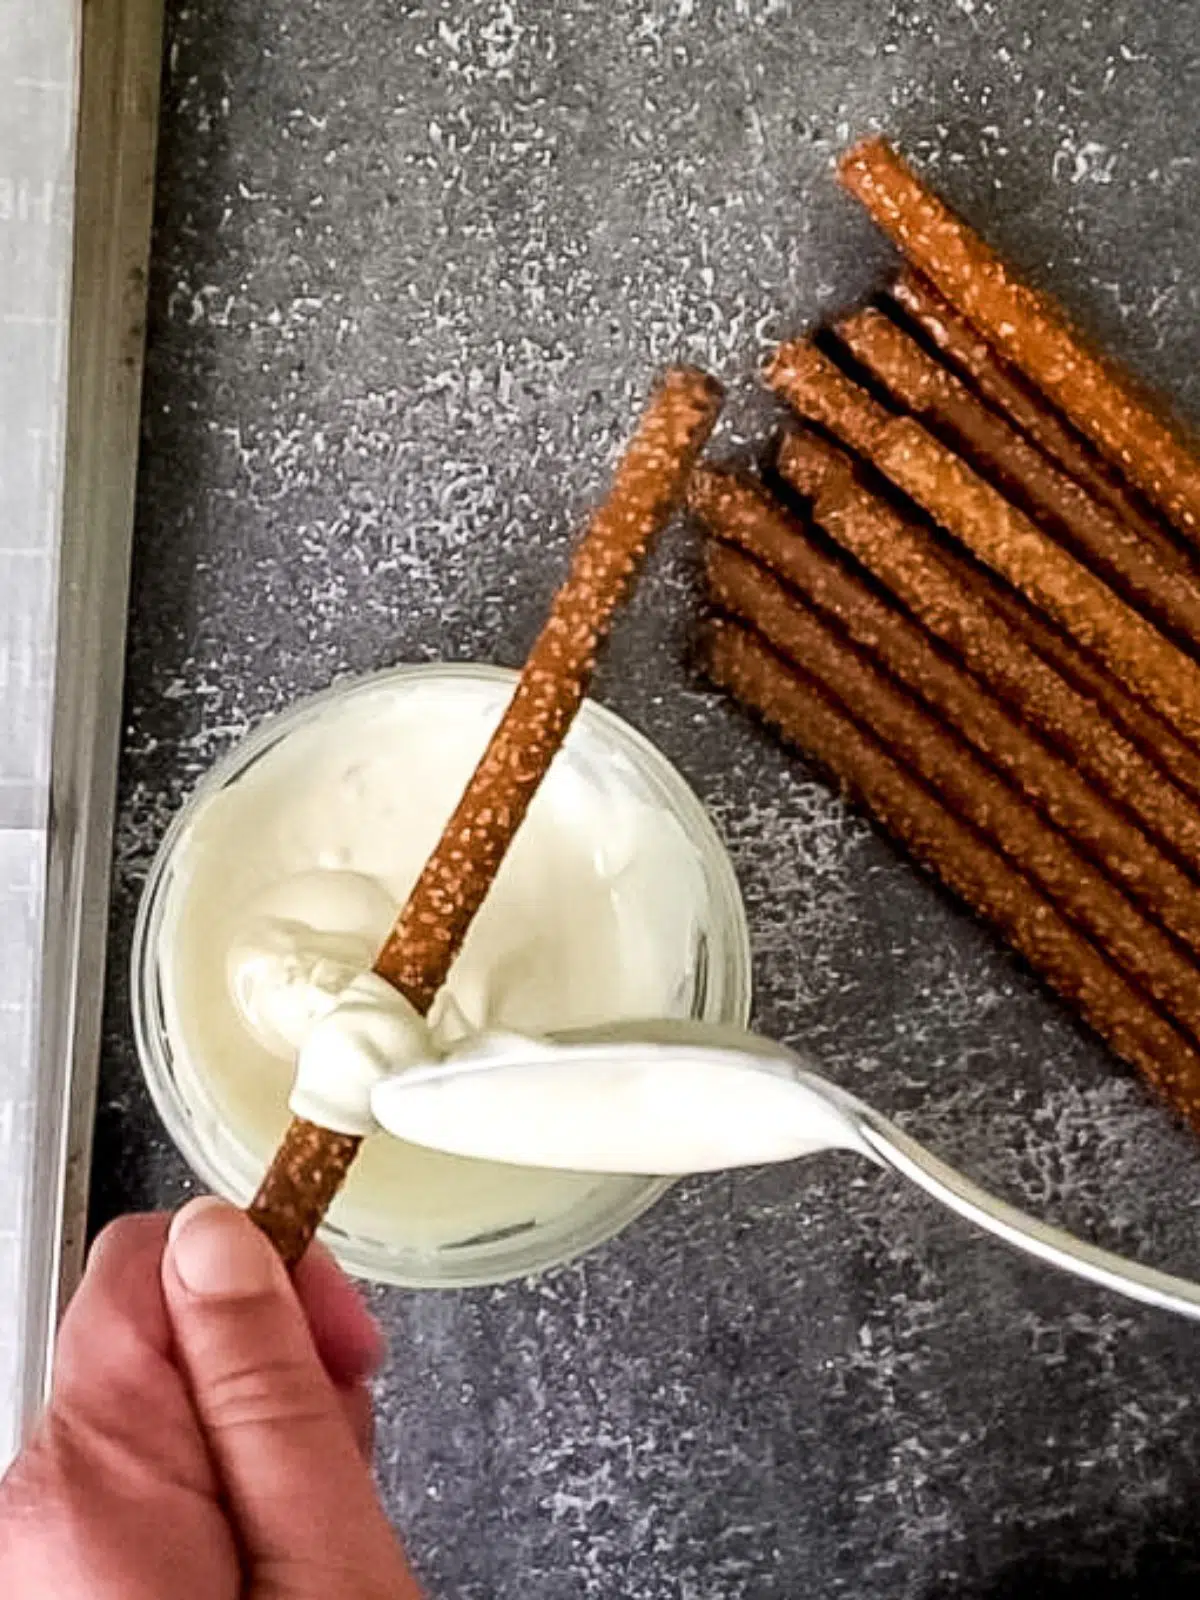 Use a spoon to cover pretzels with melted white chocolate.